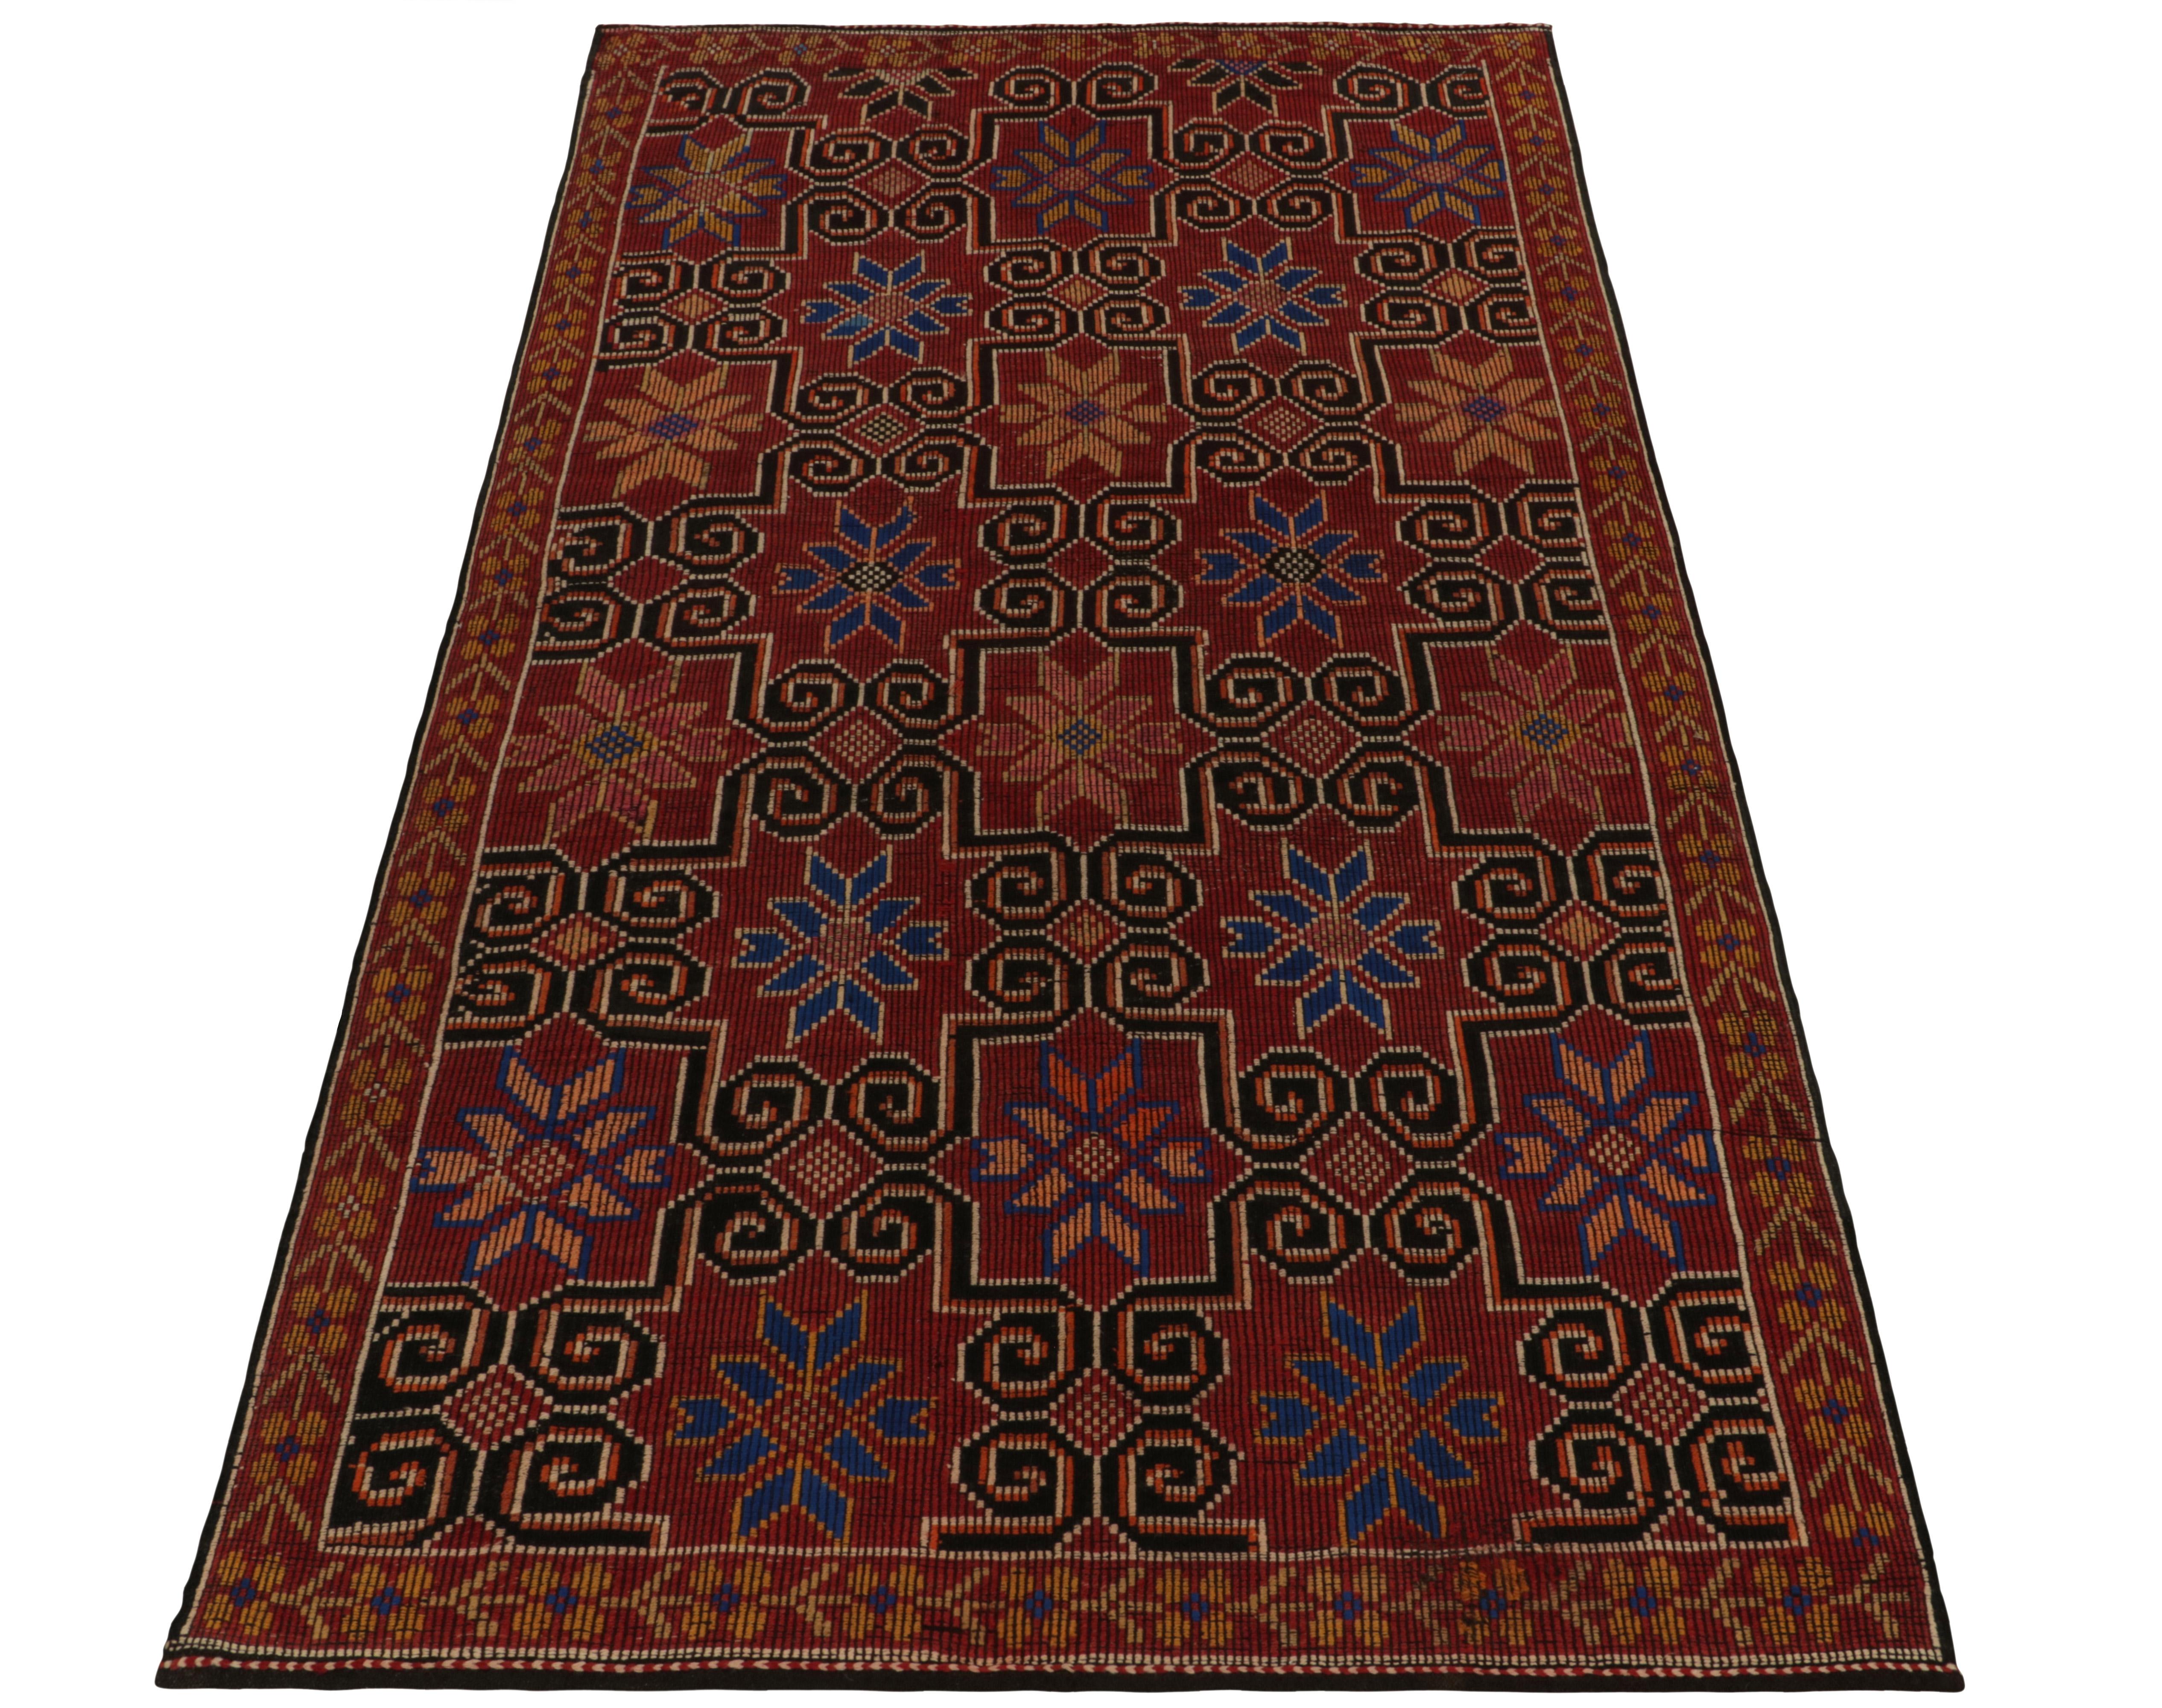 From the celebrated Kurdish style, this vintage 6x10 Cecim kilim remarks a special new curation joining our flatweave collection. This vintage mid-century flatweave from Turkey enjoys fine embroidery in maroon, gold & black with blue lining further